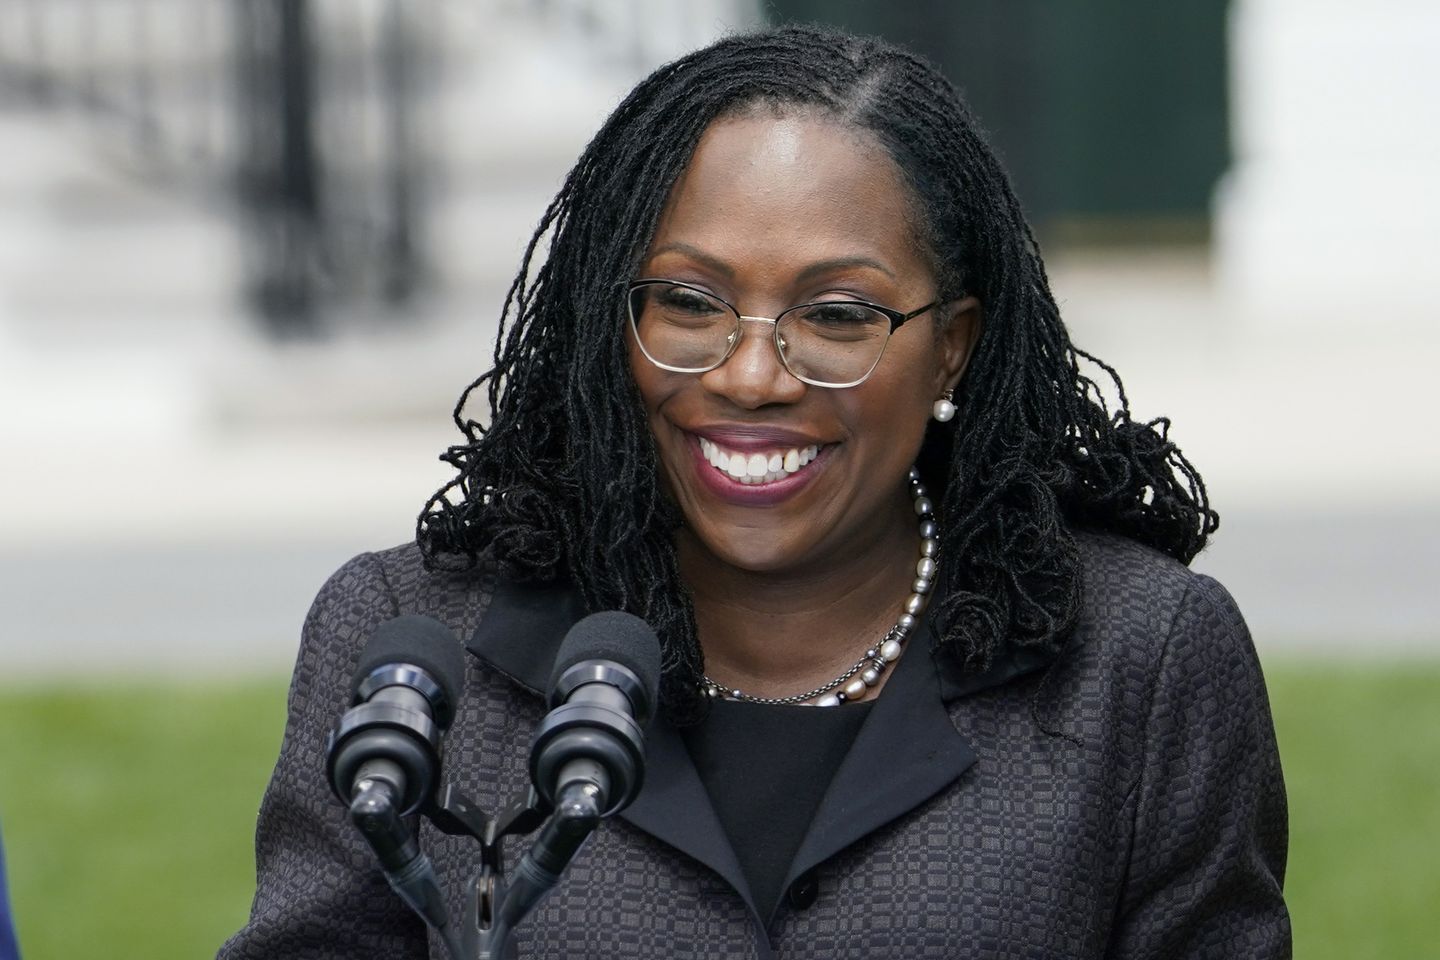 Supreme Court justice Ketanji Brown Jackson expected to weigh in on affirmative action